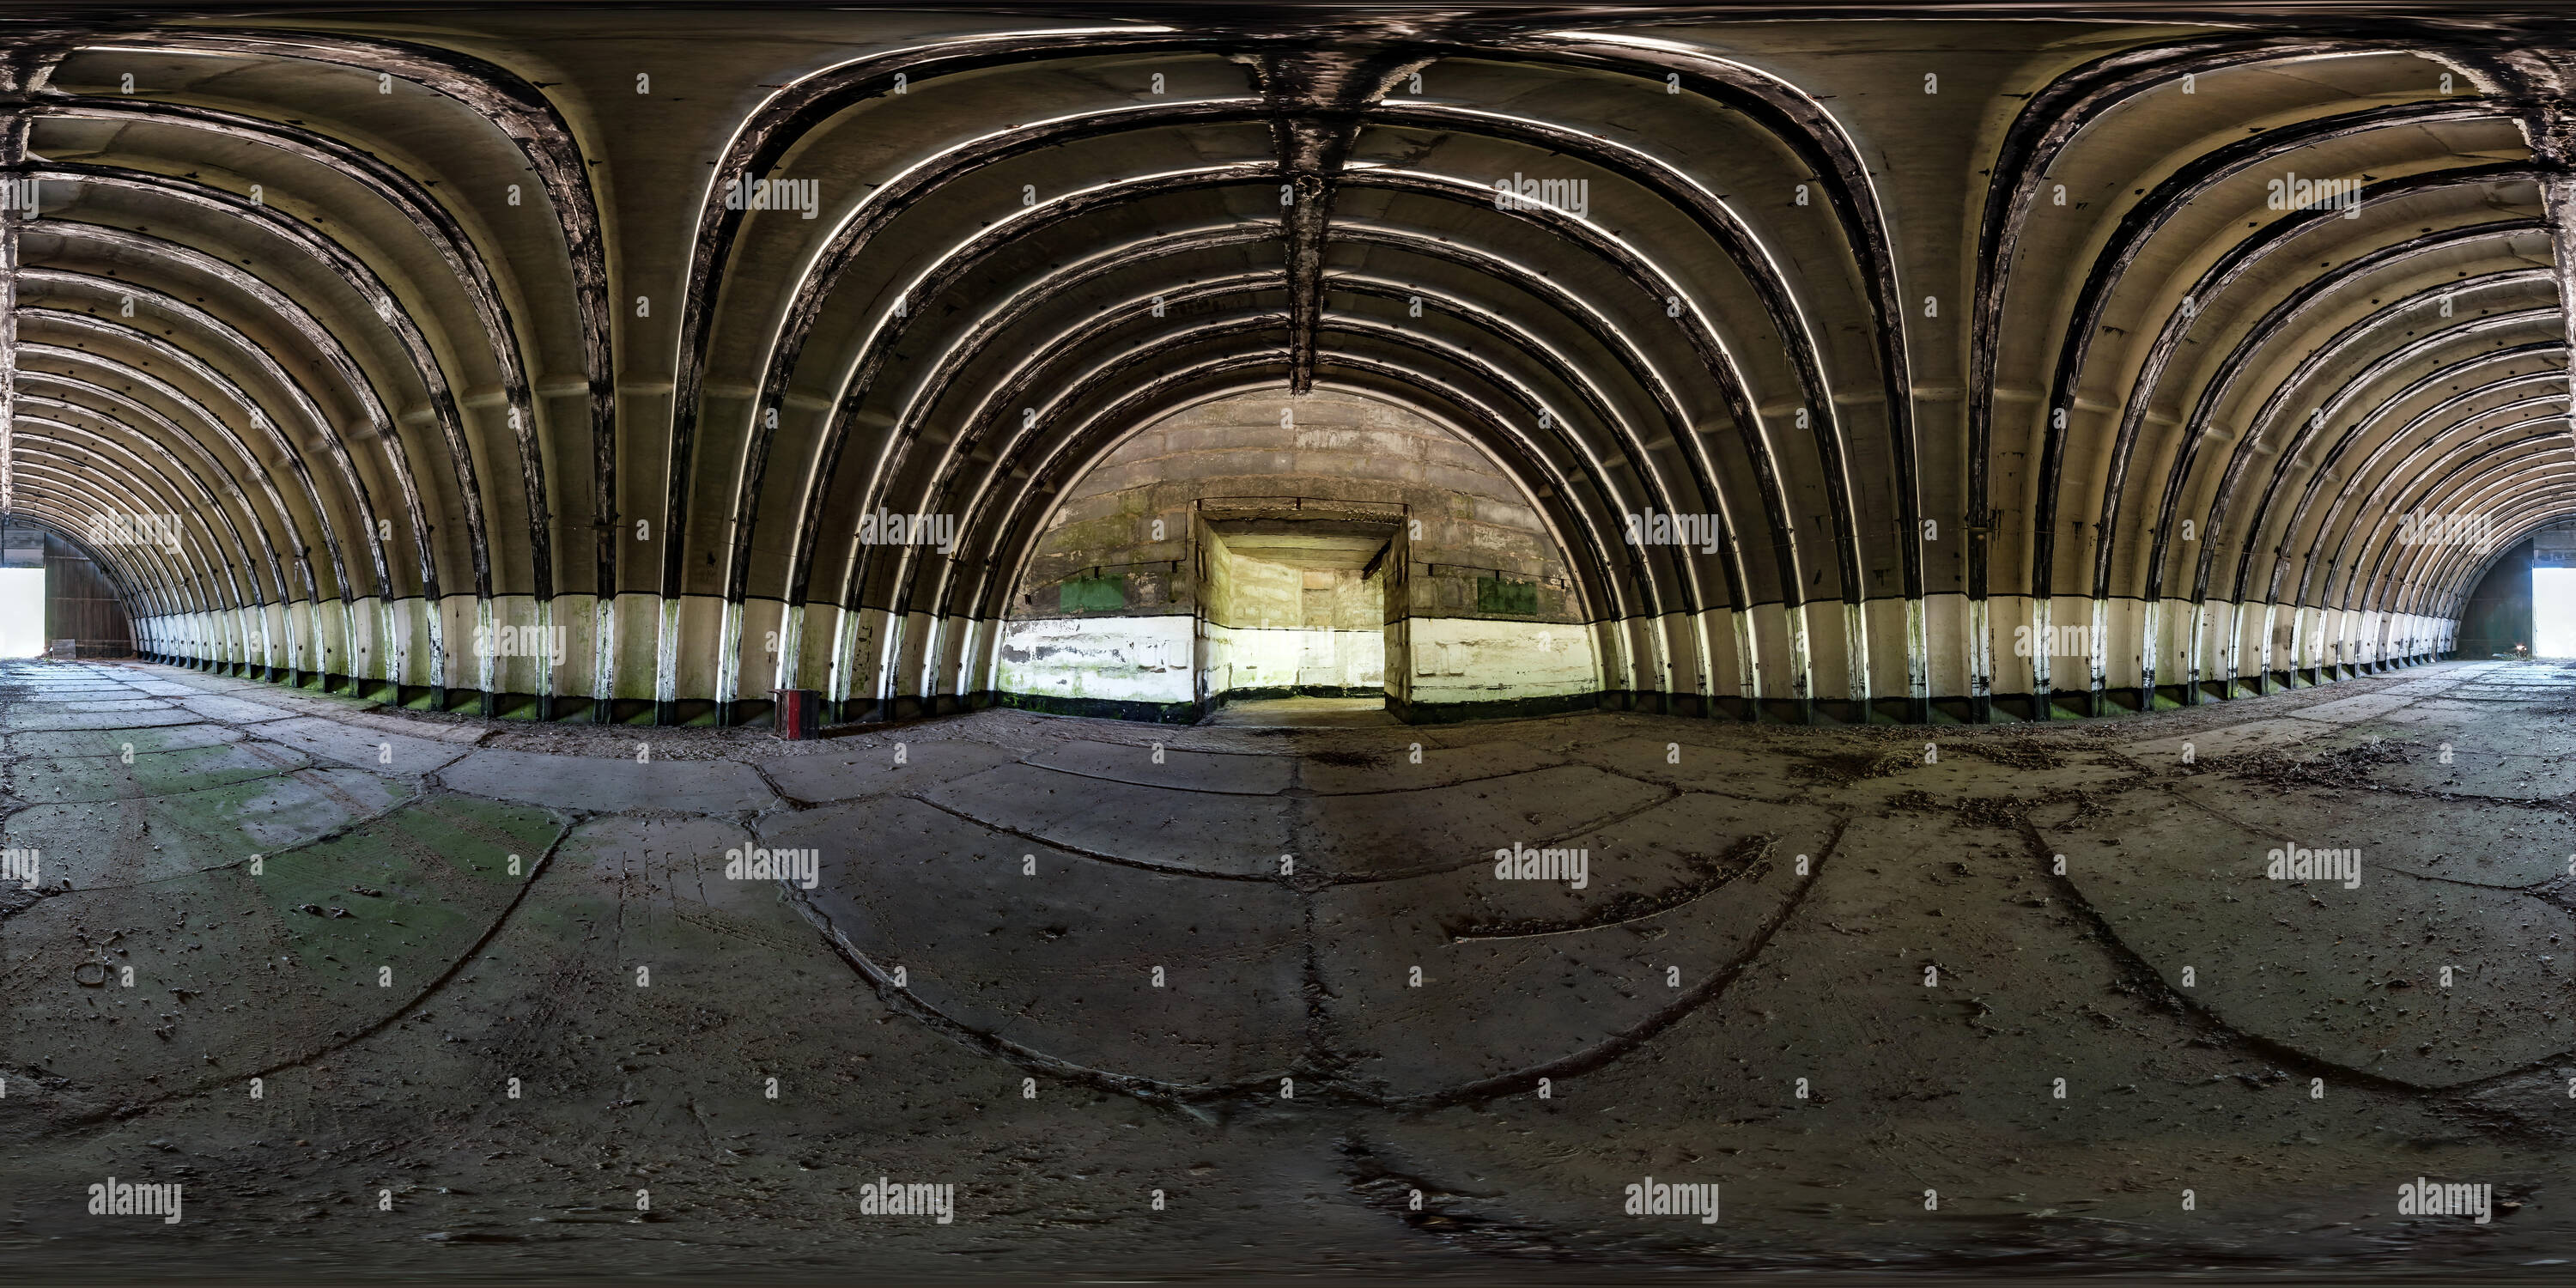 360 degree panoramic view of seamless spherical hdri panorama 360 degrees angle view inside of empty old aircraft hangar in equirectangular projection with zenith and nadir, ready